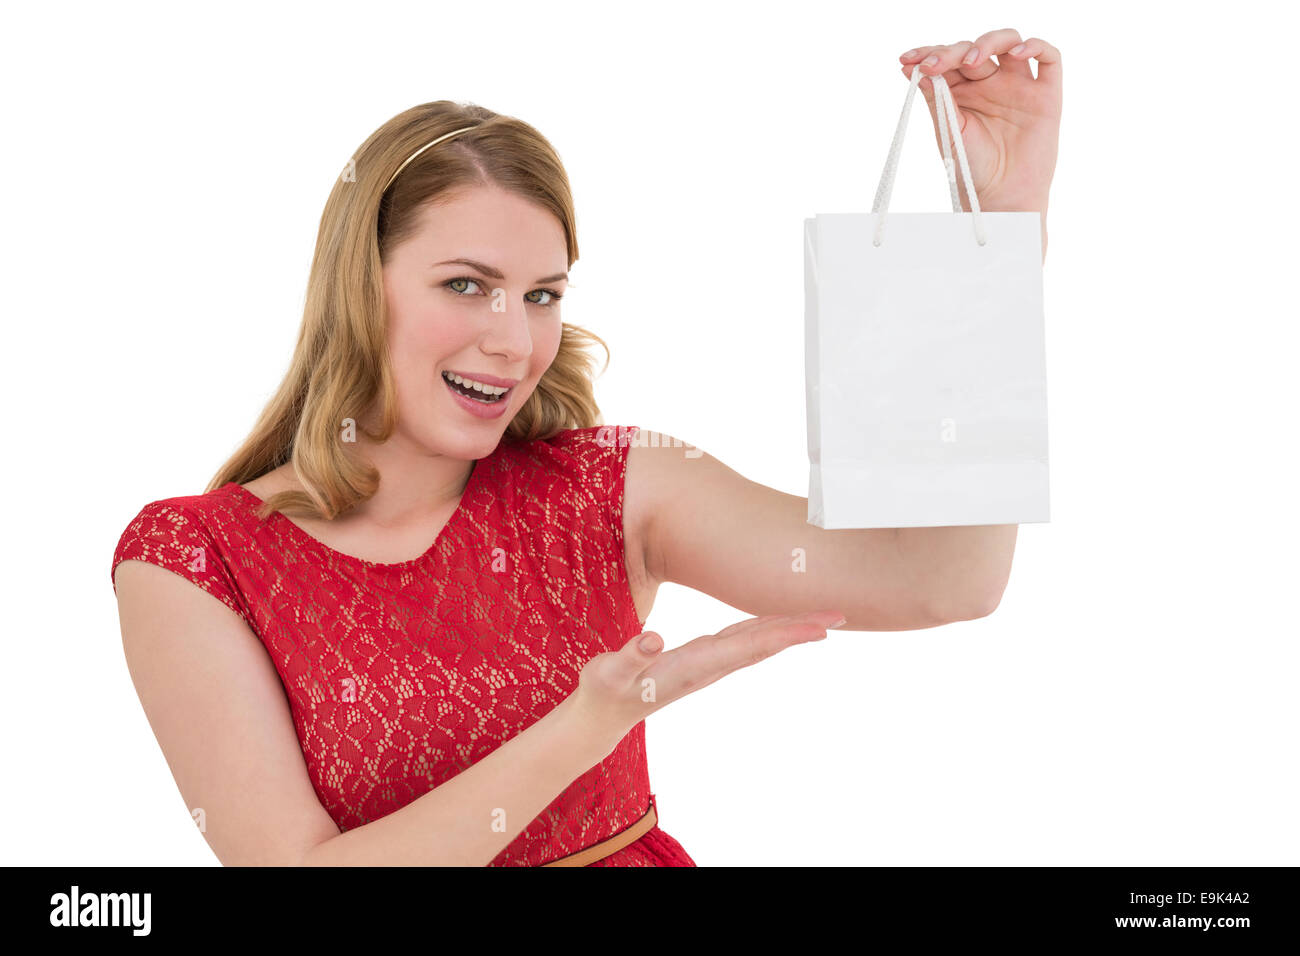 Smiling woman presenting a shopping bag Stock Photo